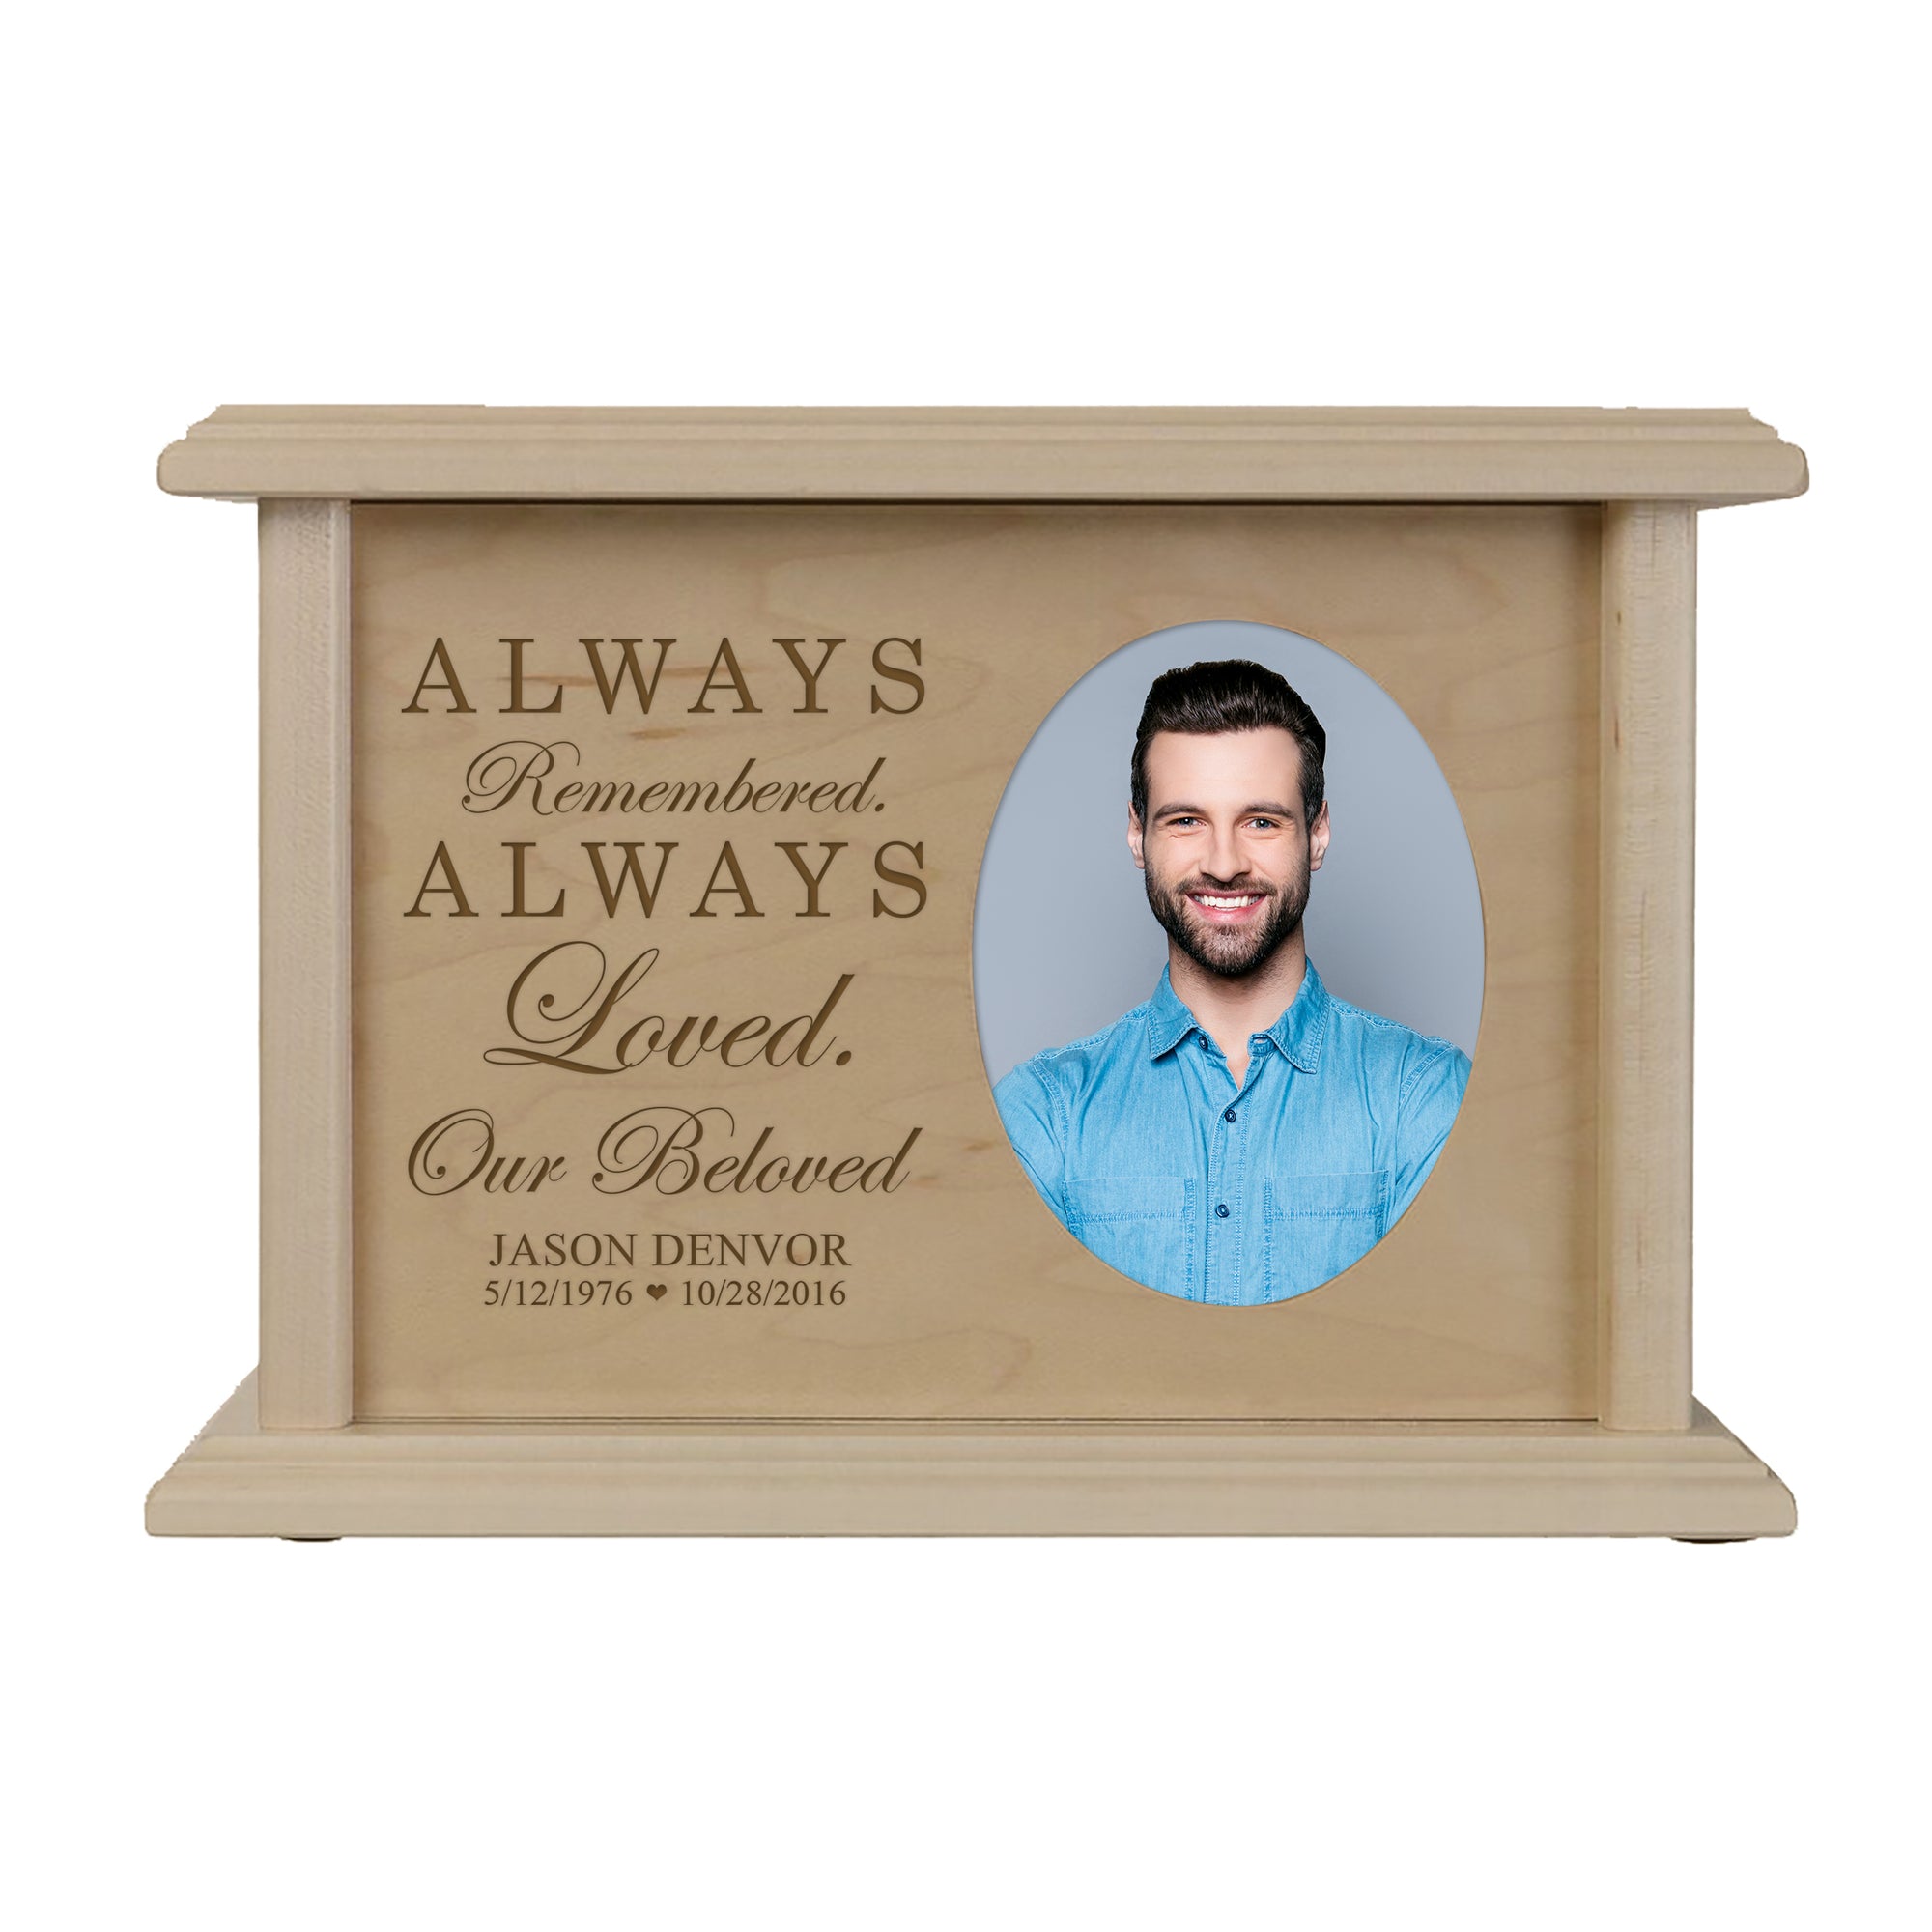 LifeSong Milestones Personalized Cremation Urns for Adult Ashes Memorial Keepsake Box - Cremation Wooden Box For Ashes Holds 65 Cubic Inches Measures 8.75x6.25x4